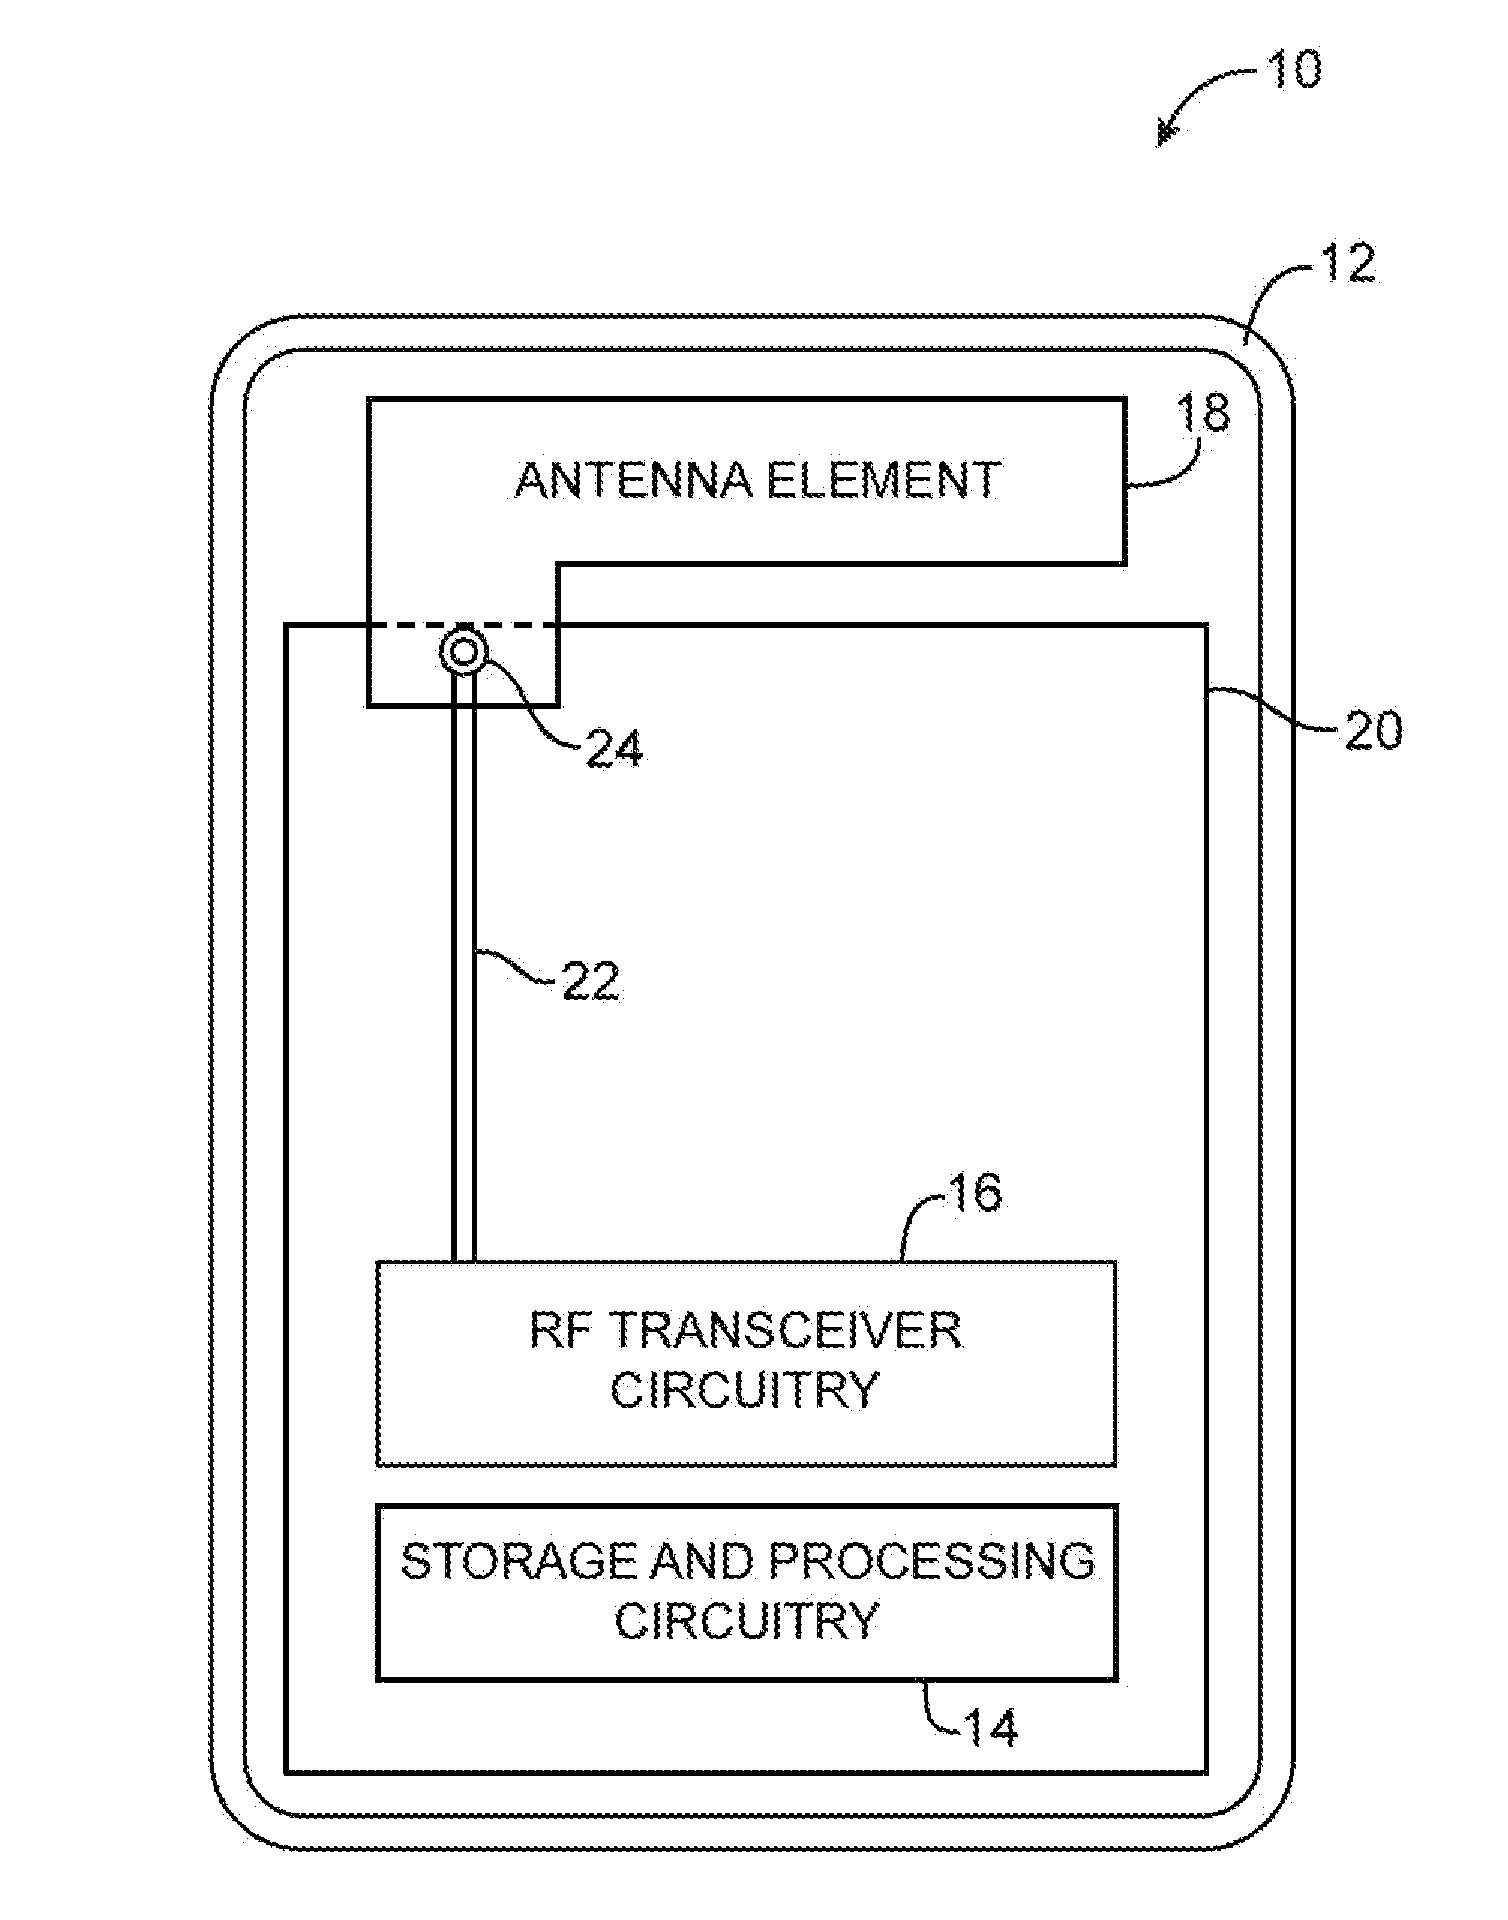 Radio-frequency test probes with integrated matching circuitry